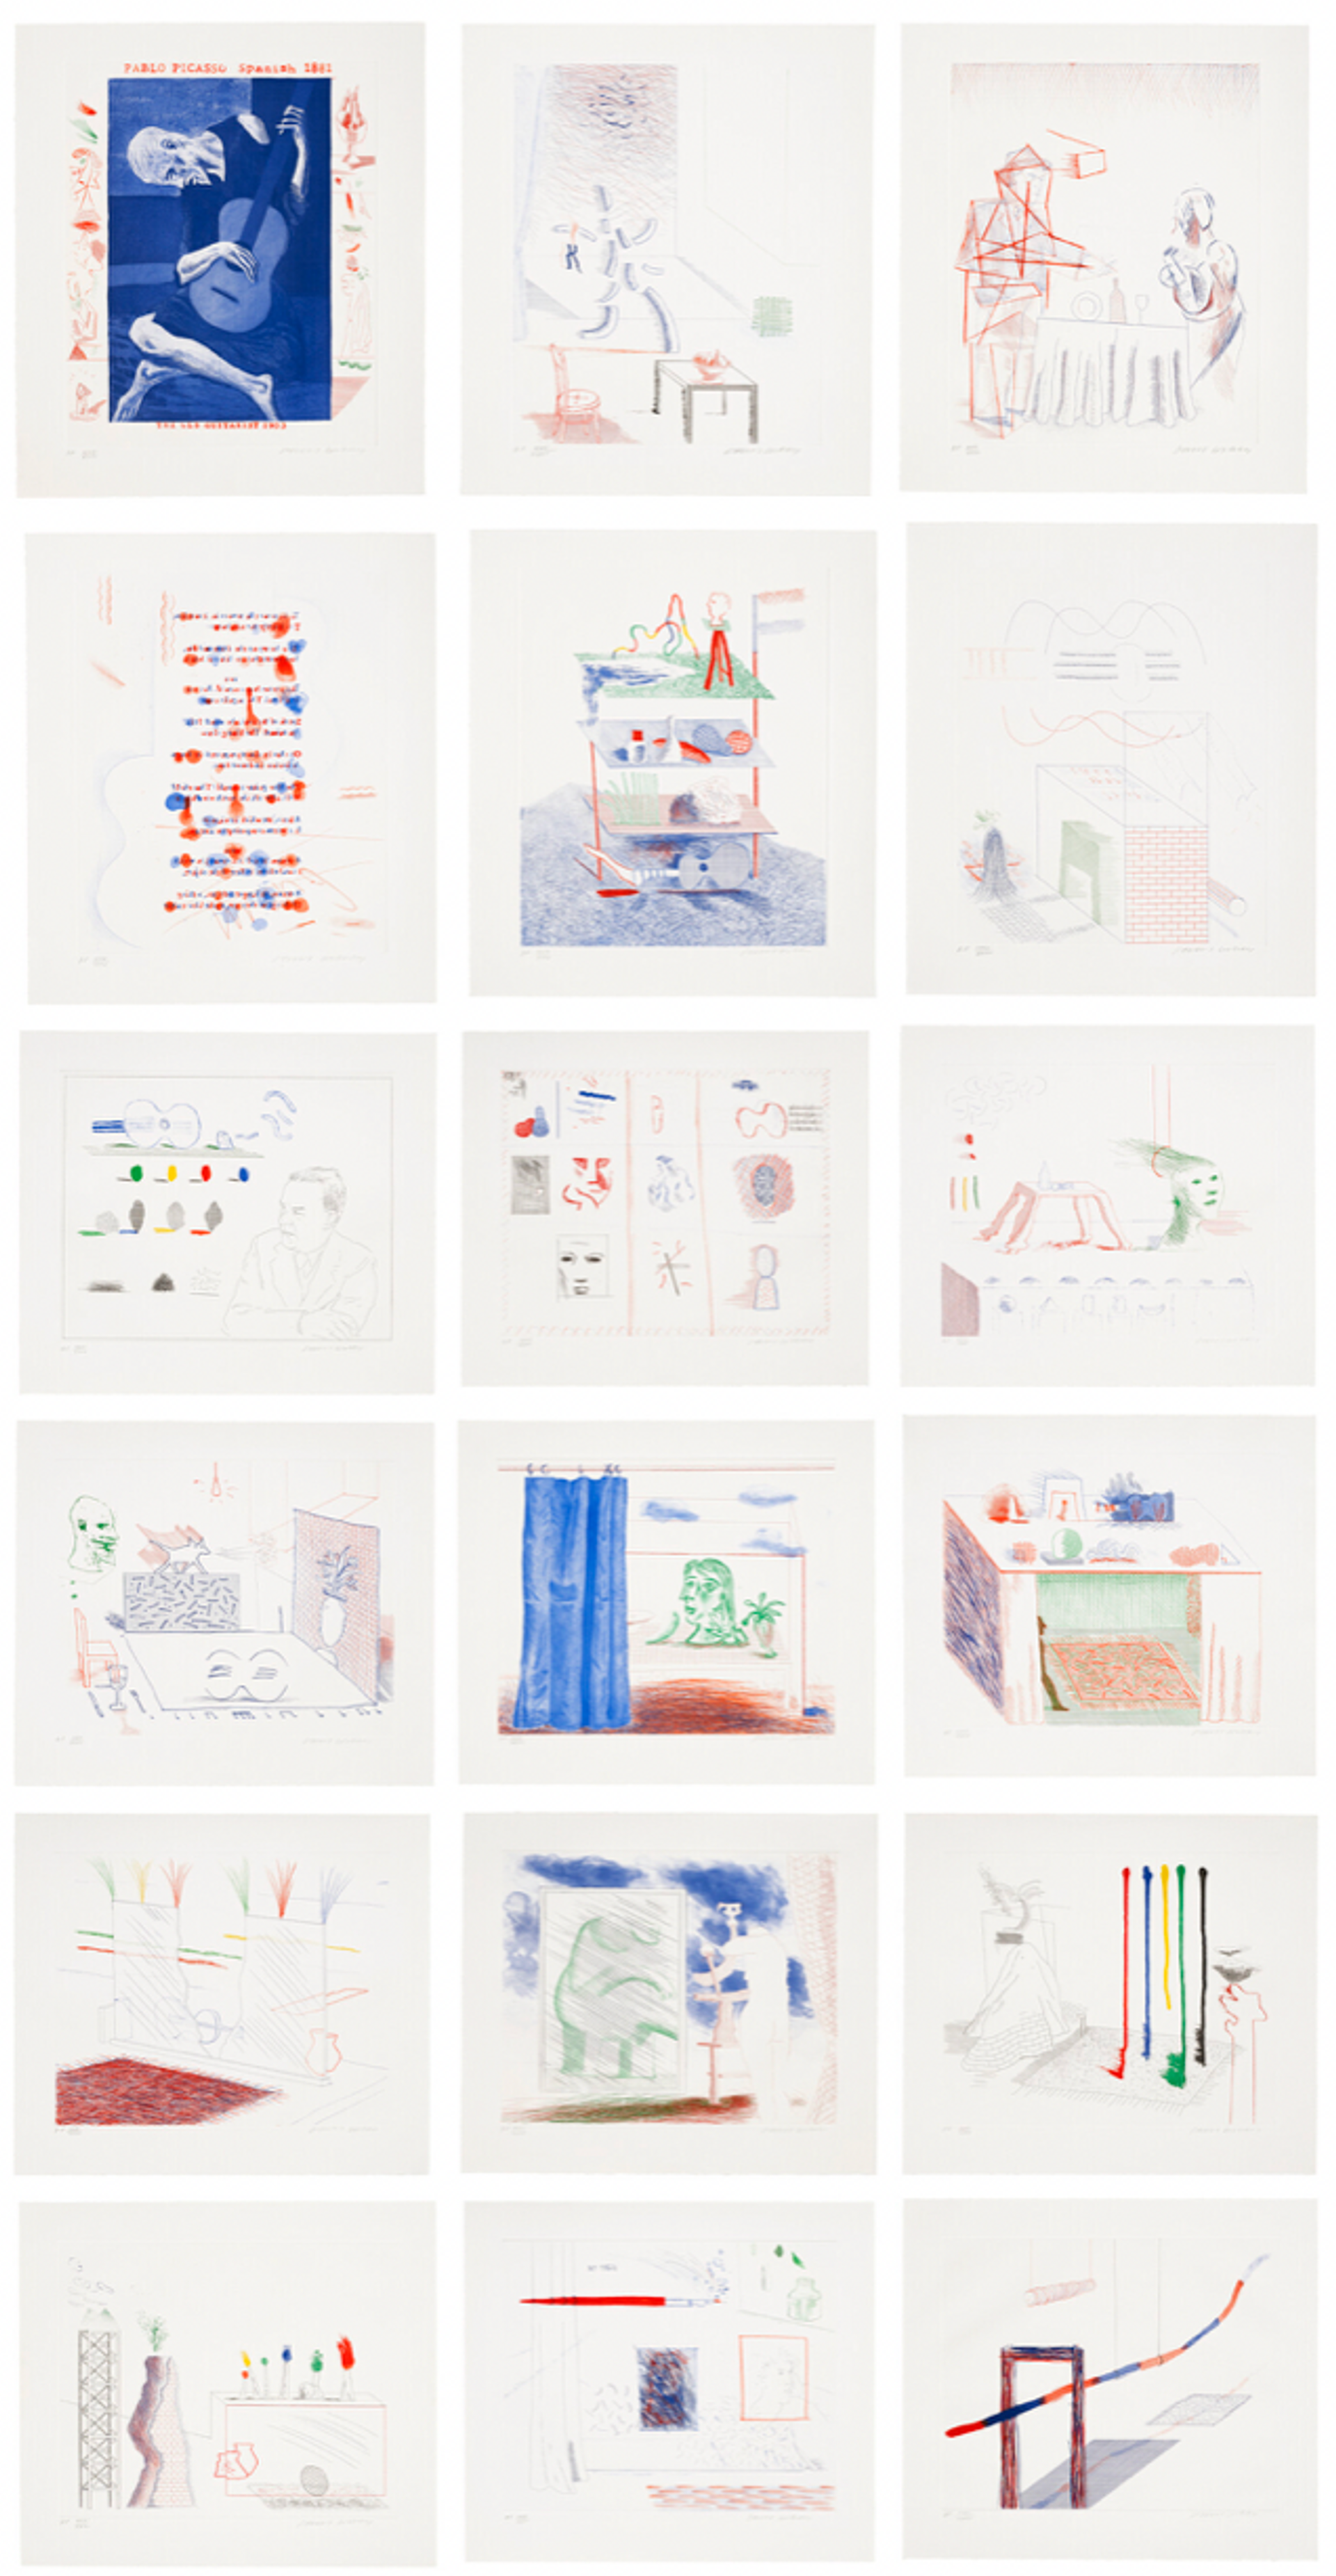 A complete set of 18 prints, inspired by Pablo Picasso's iconography.